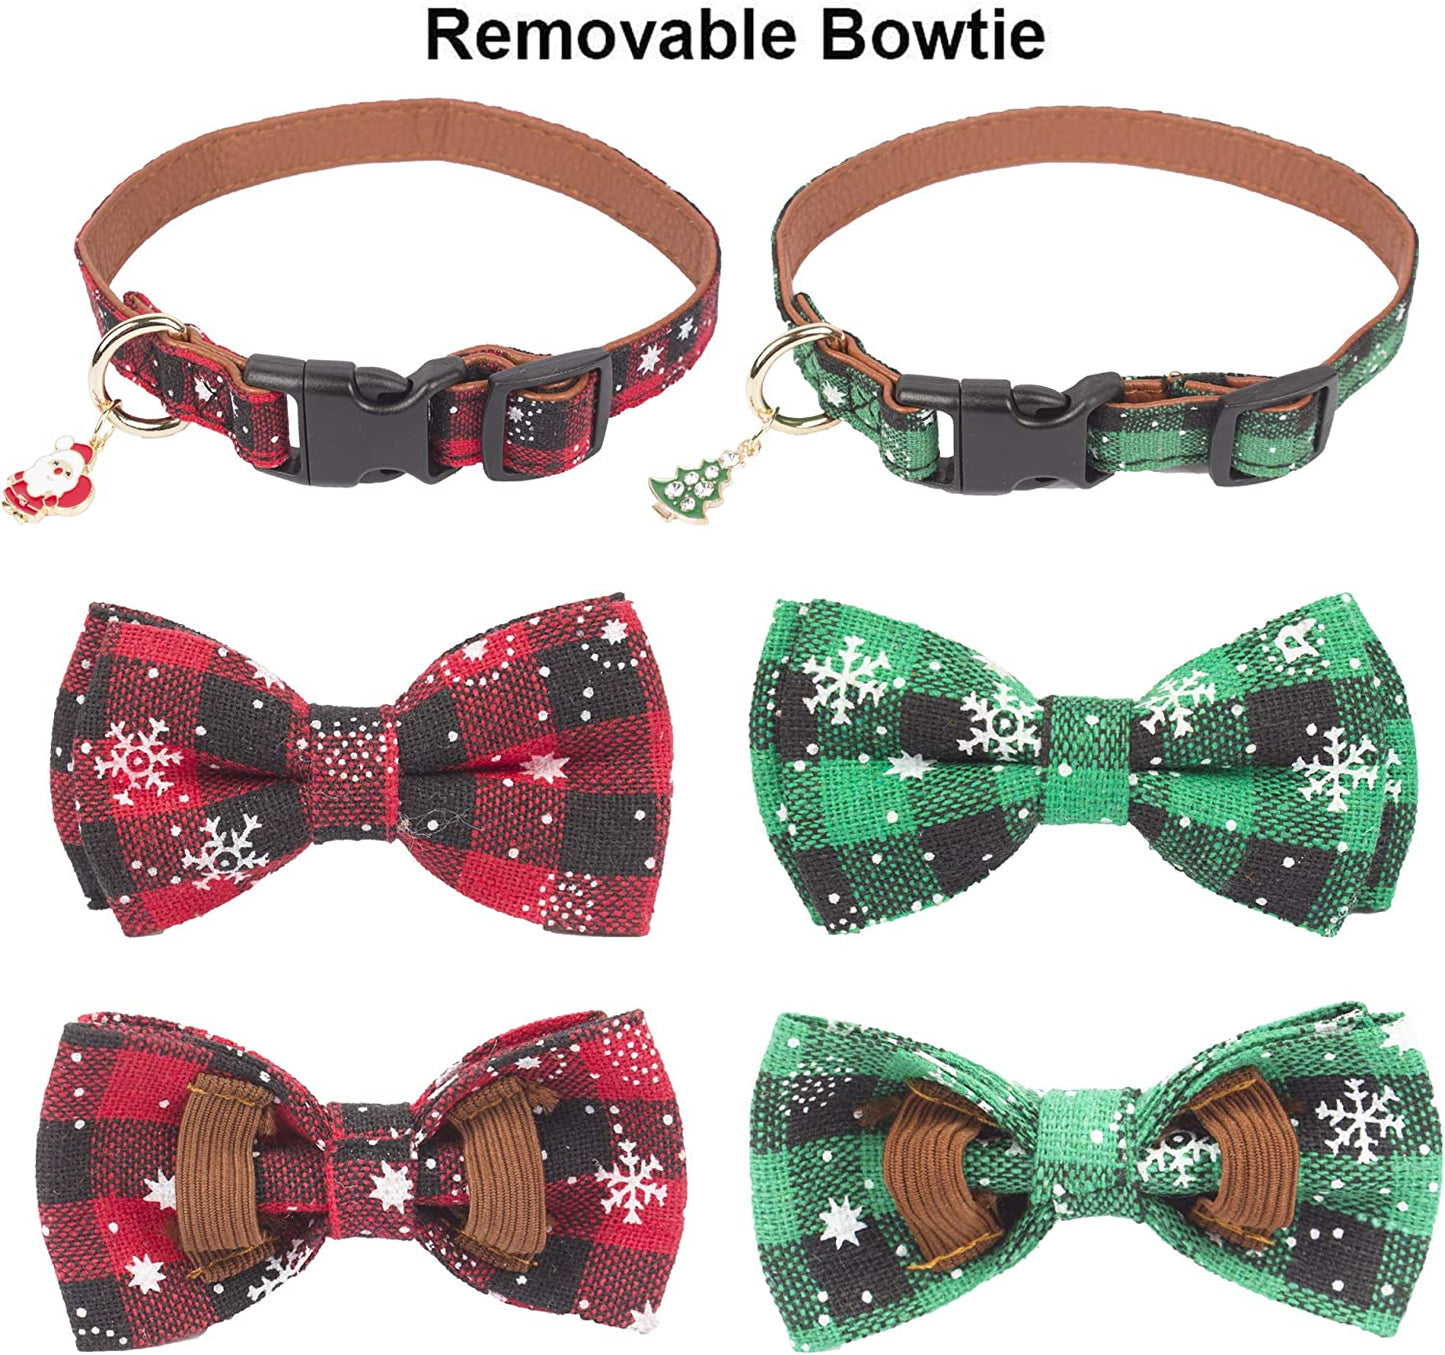 ADOGGYGO Christmas Dog Collar with Bow Tie Adjustable Bowtie Plaid Red Green Dog Pet Collars for Small Medium Large Dogs (Small, Red&Green&White) Animals & Pet Supplies > Pet Supplies > Dog Supplies > Dog Apparel ADOGGYGO   